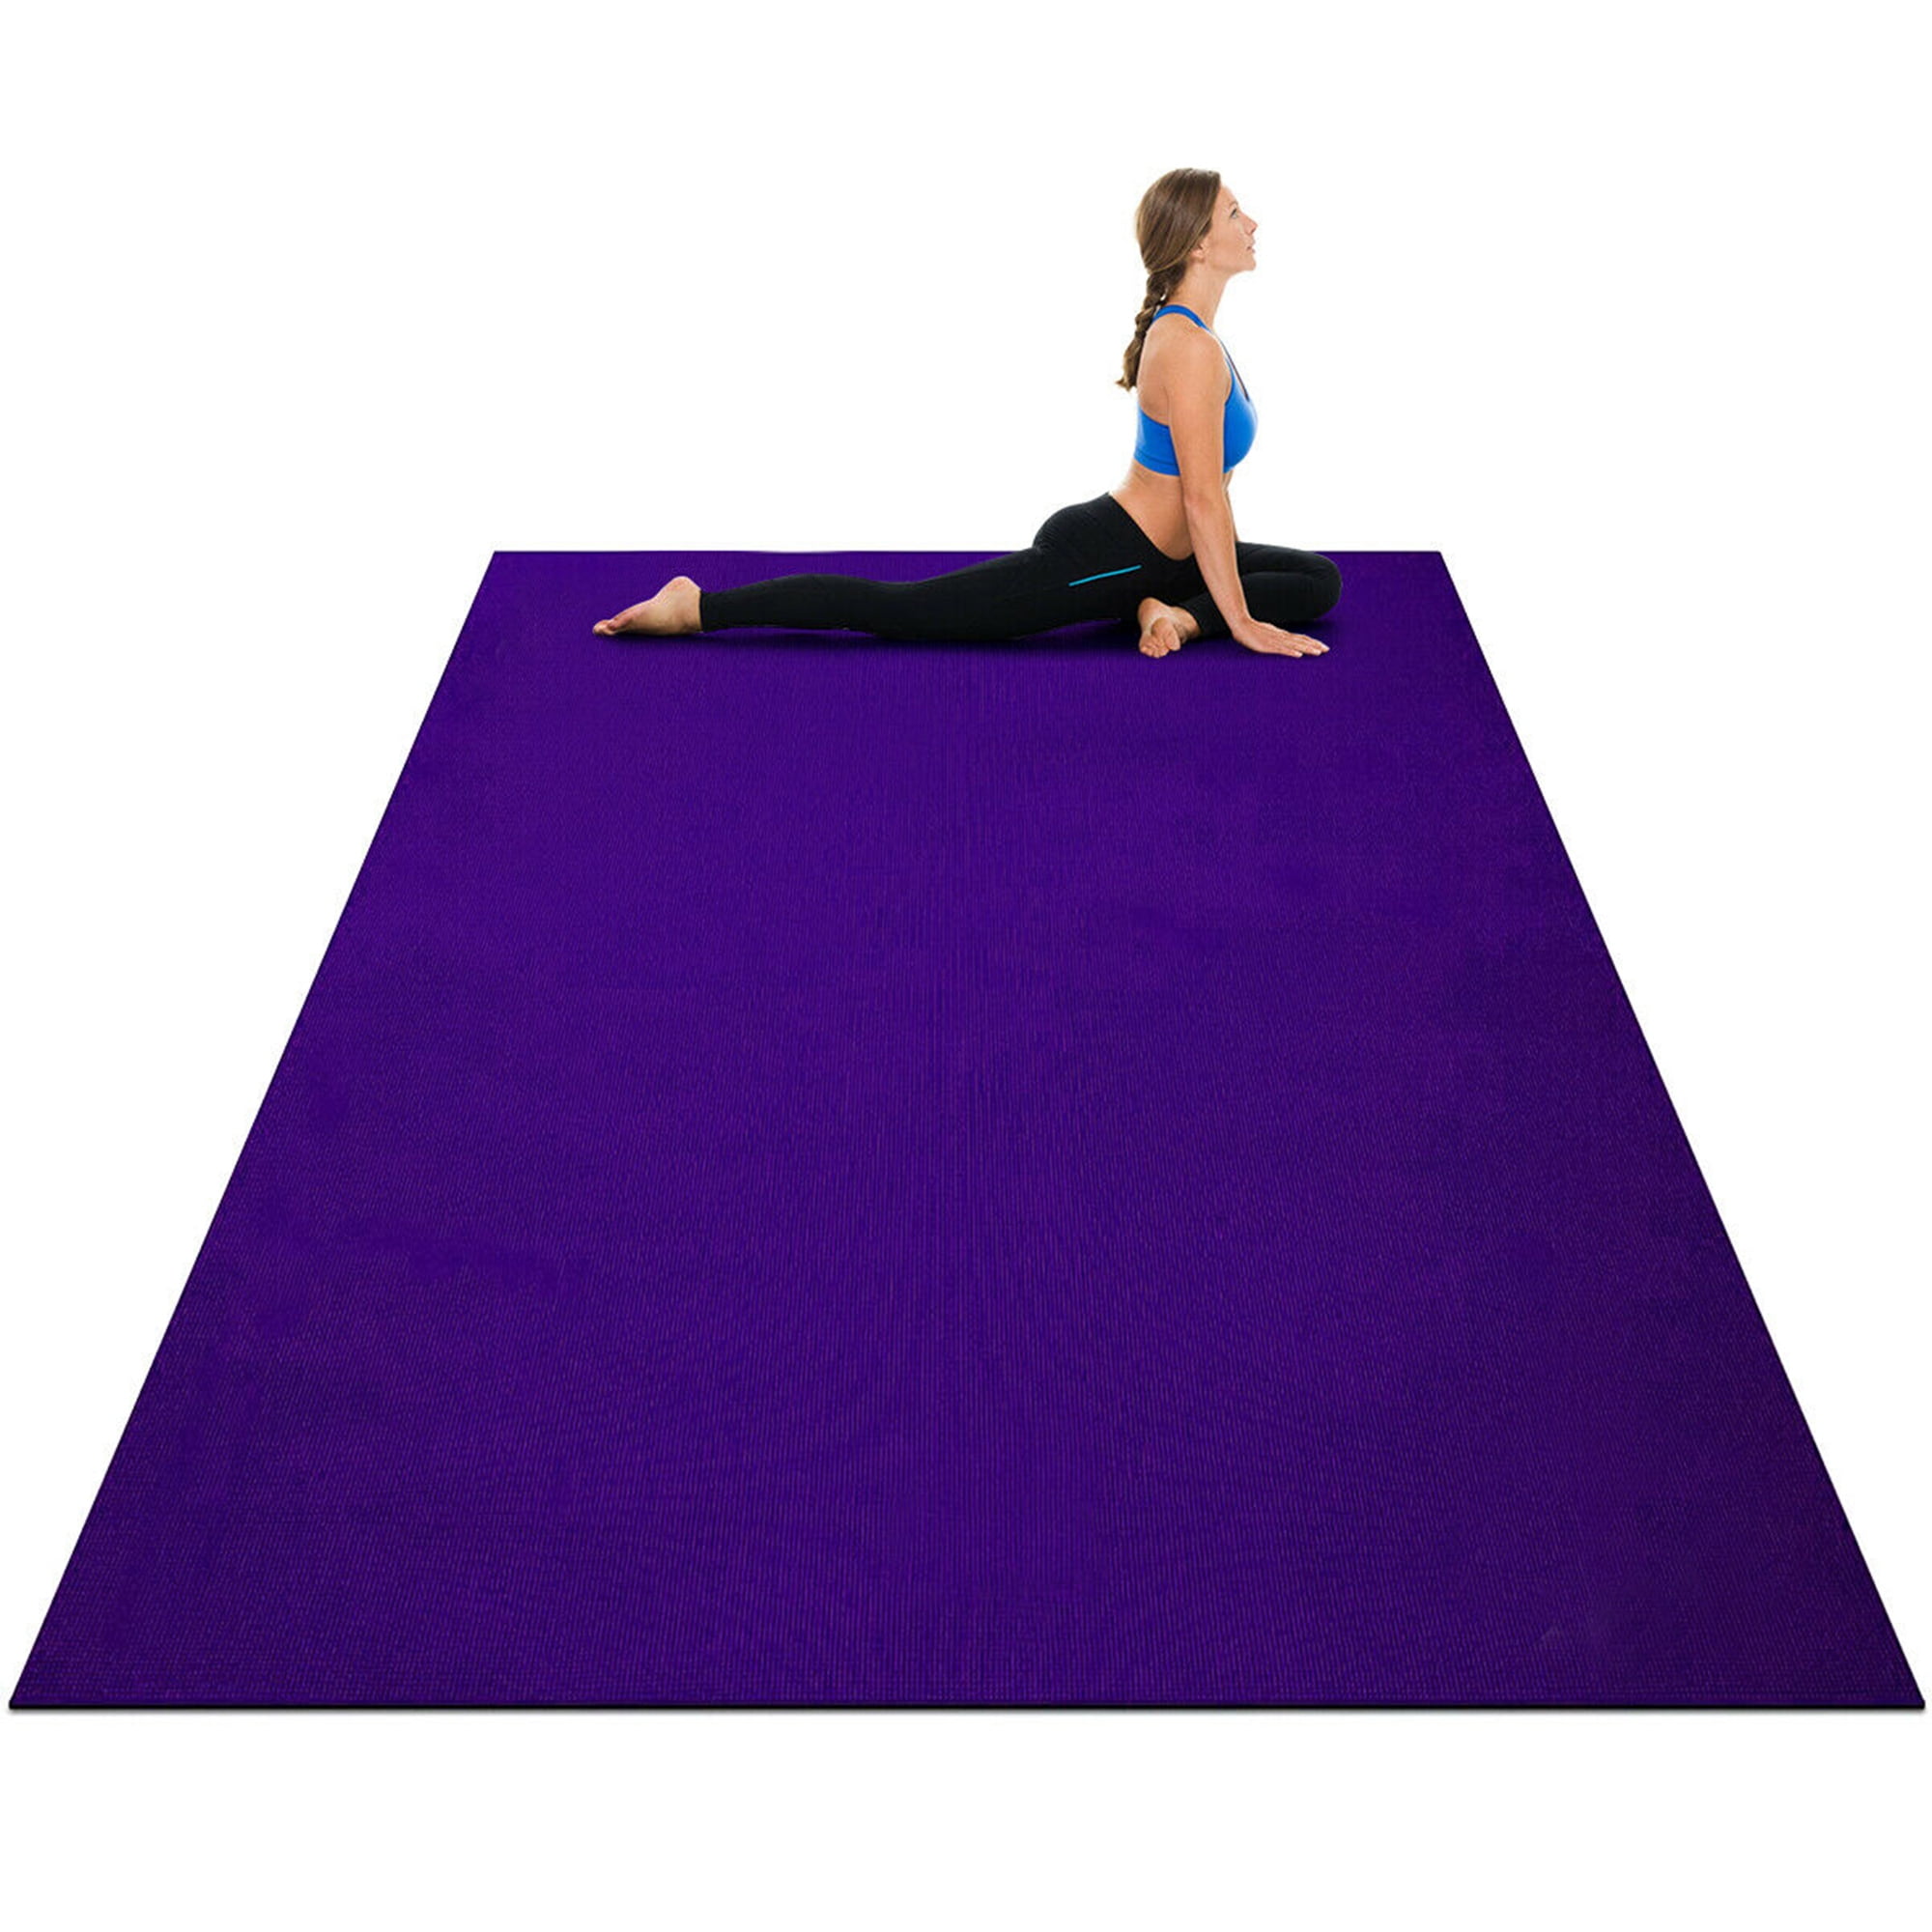 Yoga Mat For Pilates Gym Exercise With Carry Strap Large Comfortable Anti-Slip 